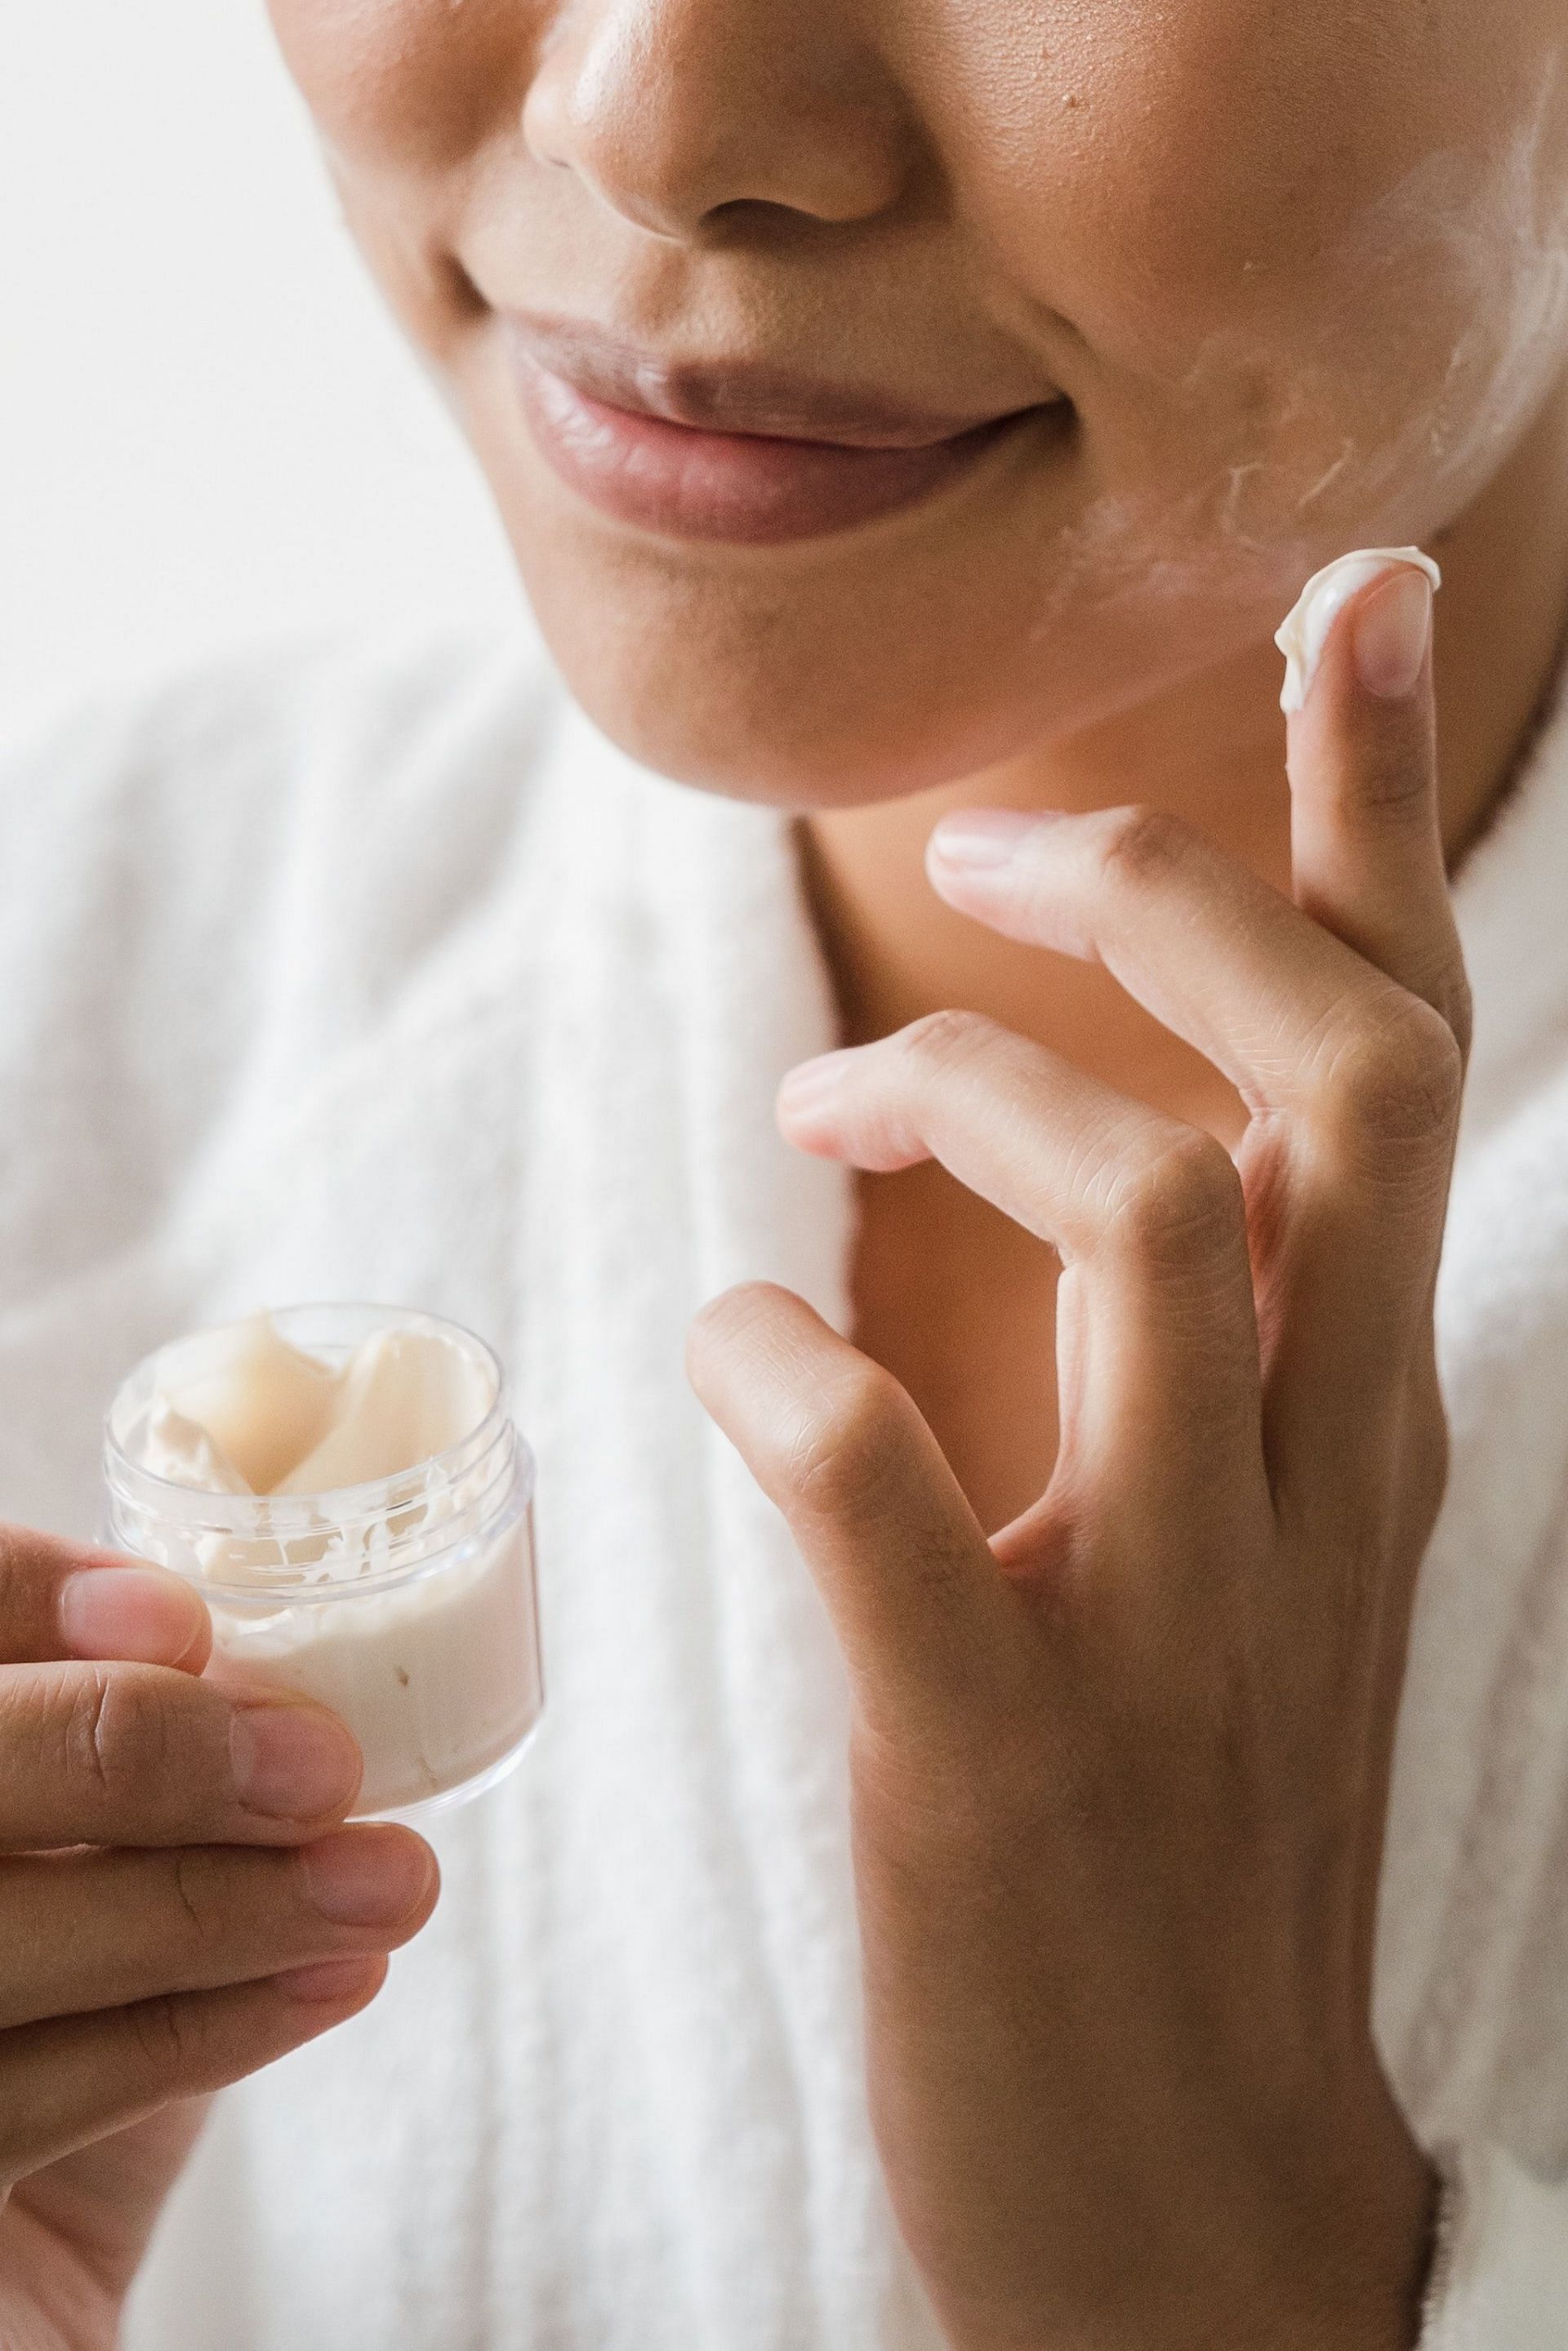 How to choose the right moisturizer for dry skin? (Image via Pexels)